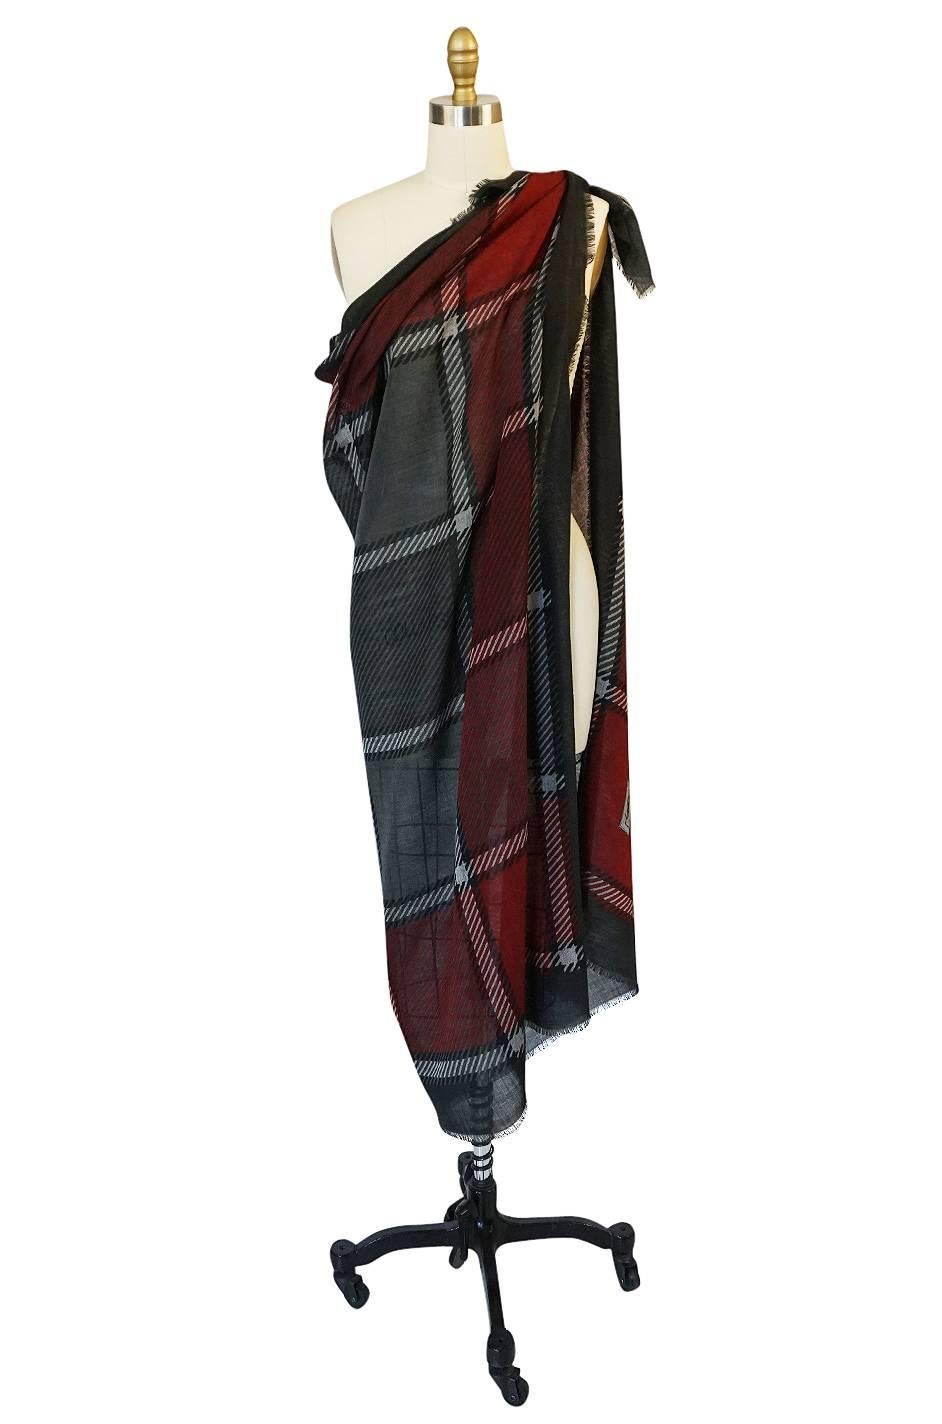 

Gorgeous and absolutely huge, this Yves Saint Laurent scarf is a mix of a deep burgundy red with taupes and with pops of silvered grey to highlight the fantastic plaid design. It is made of a fine silk and wool mix that is extremely light and